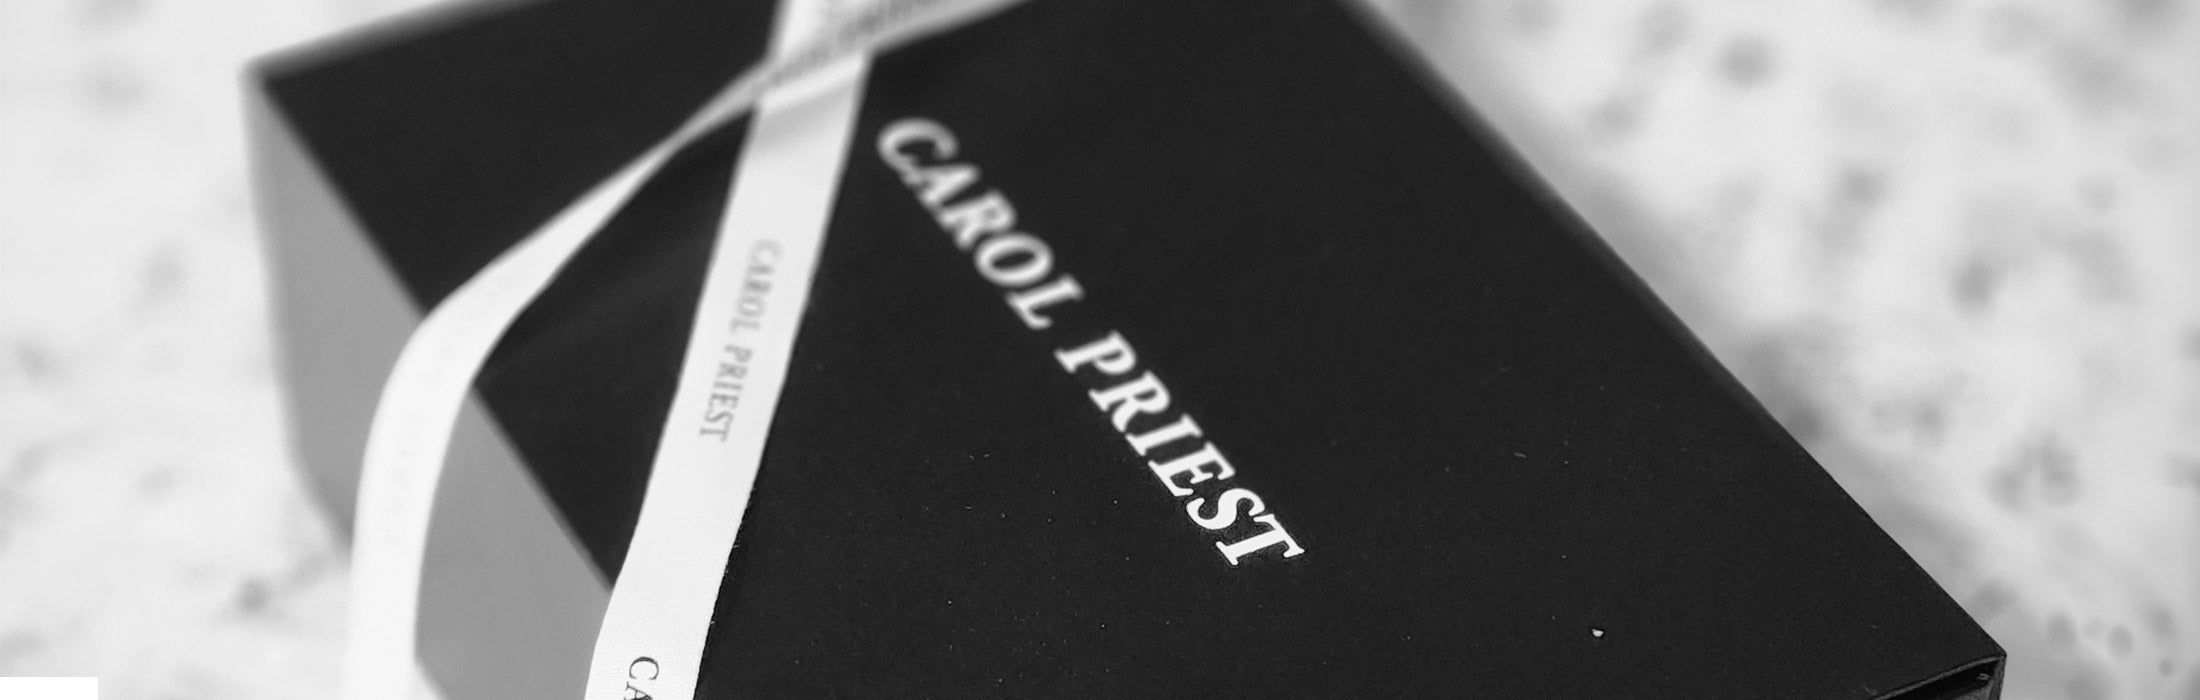 Carol Priest's brand logo beautifully engraved on a luxury gift box, embodying the brand's commitment to refined quality.